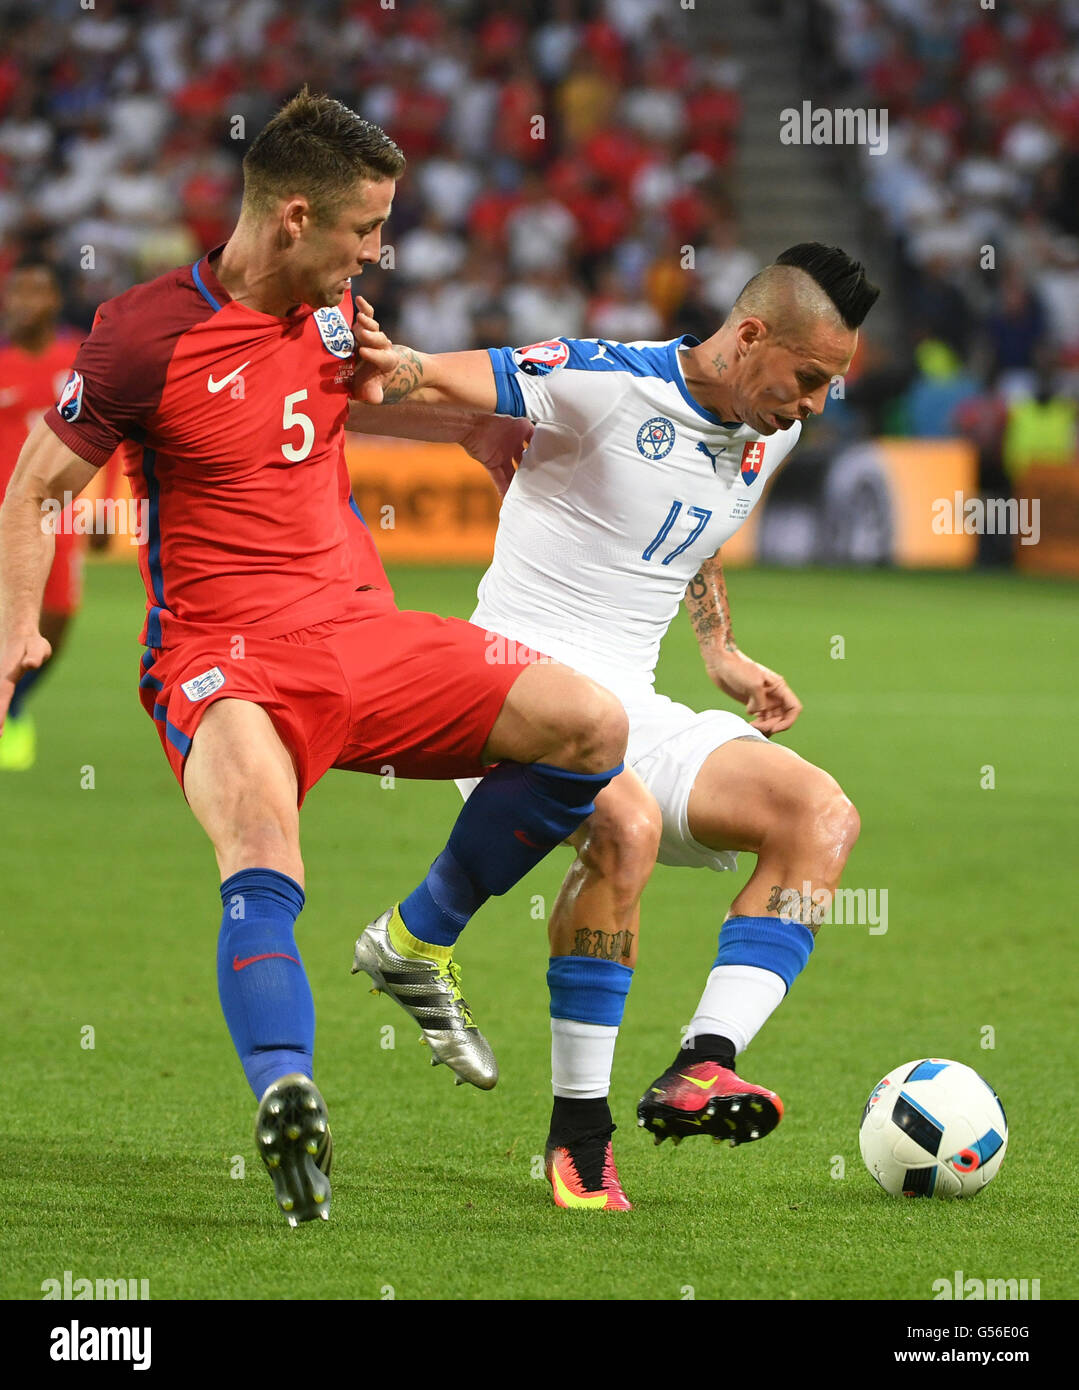 Saint Etienne, France. 20th June, 2016.  Gary Cahill(L) of England vies with Marek Hamsik of Slovakia during their Euro 2016 Group B soccer match in Saint-Etienne, France, June 21, 2016. Credit:  Xinhua/Alamy Live News Stock Photo